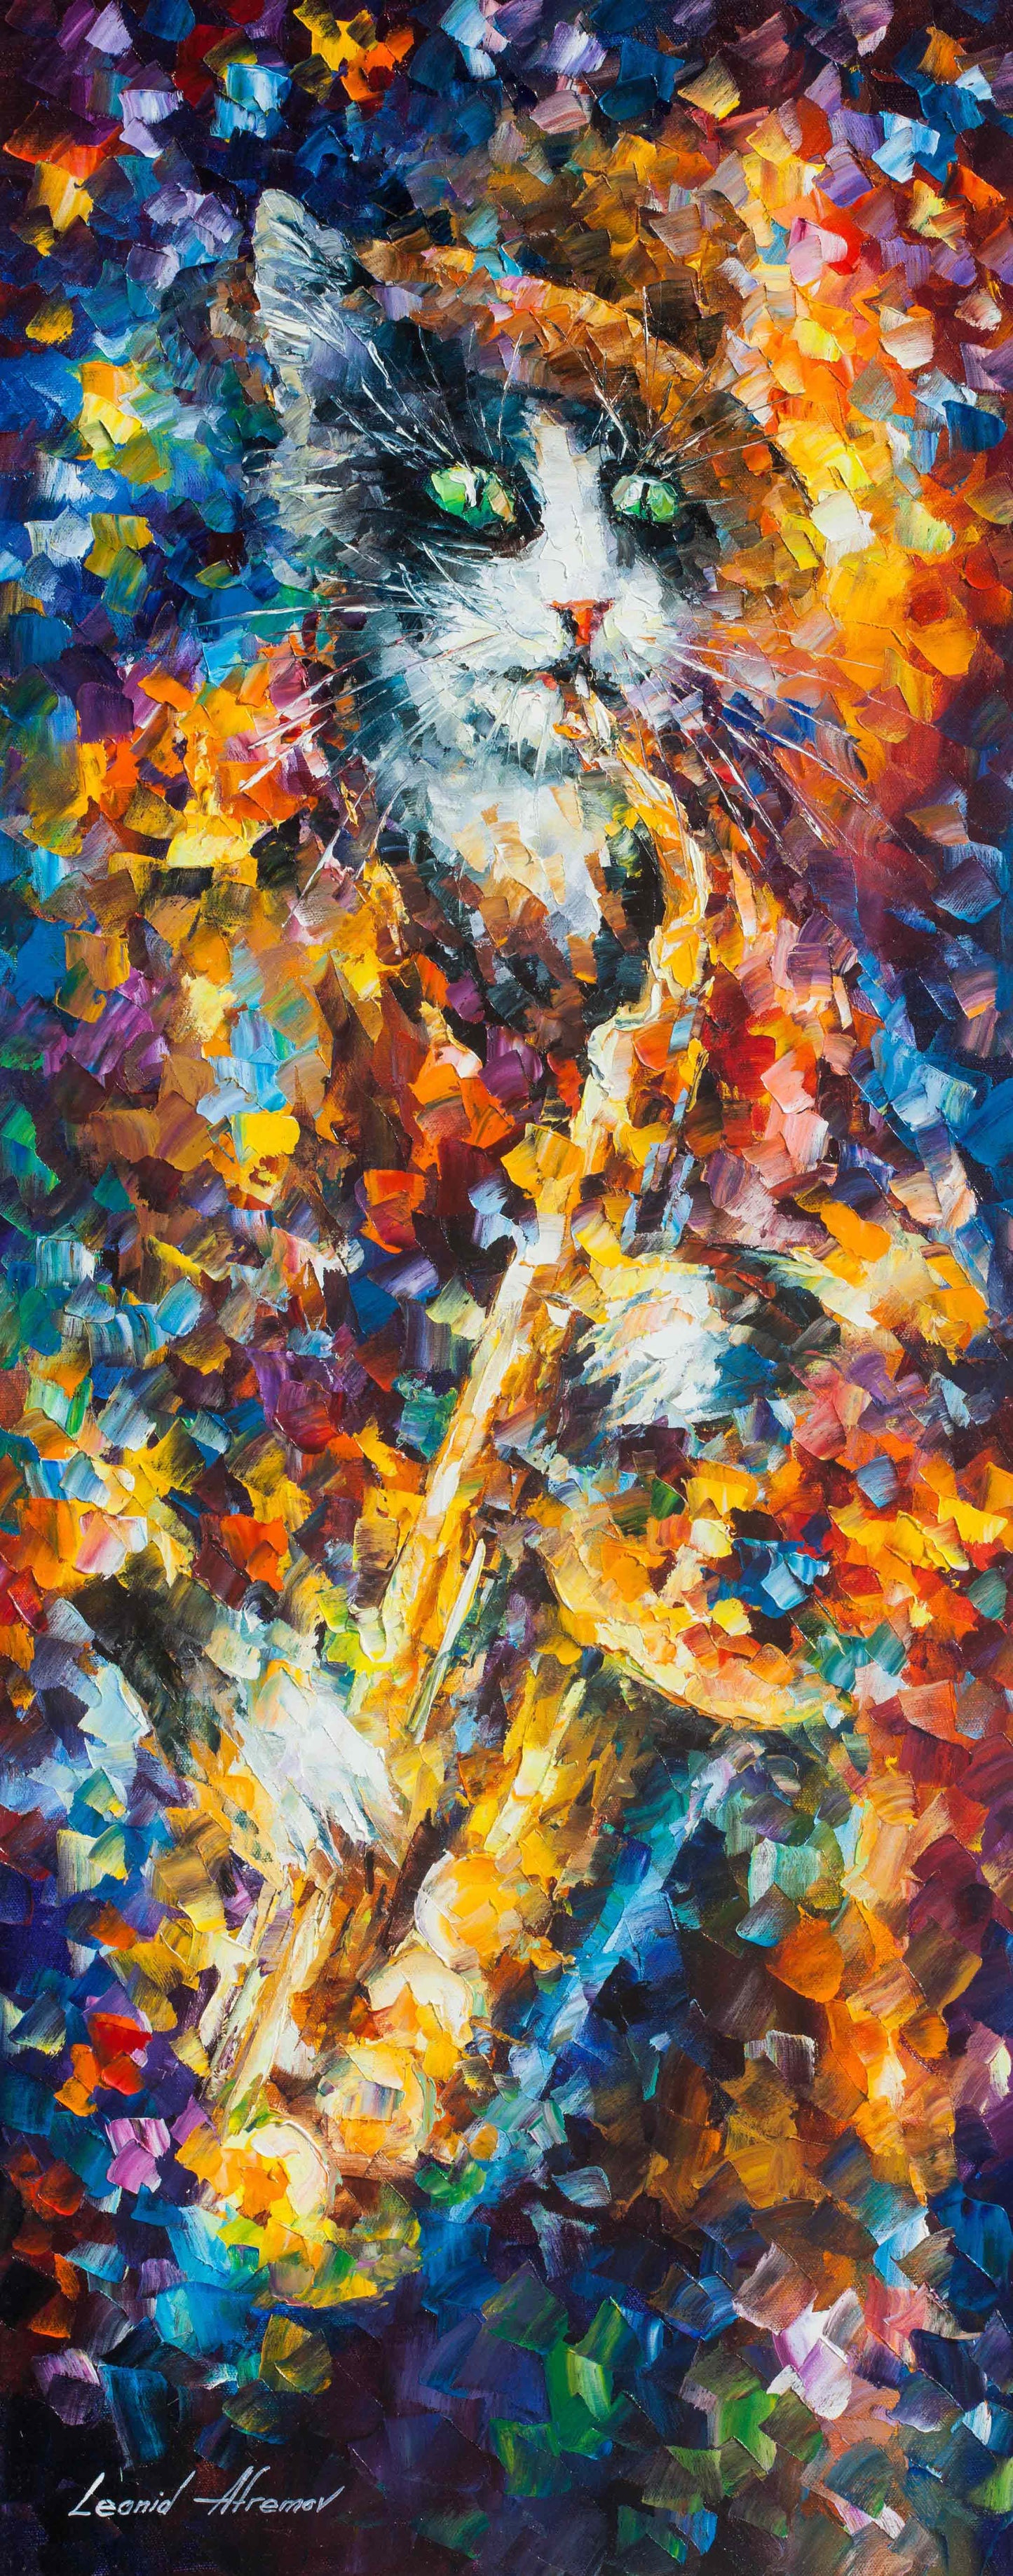 SAXOPHONE - Afremov - Paint By Numbers Kit